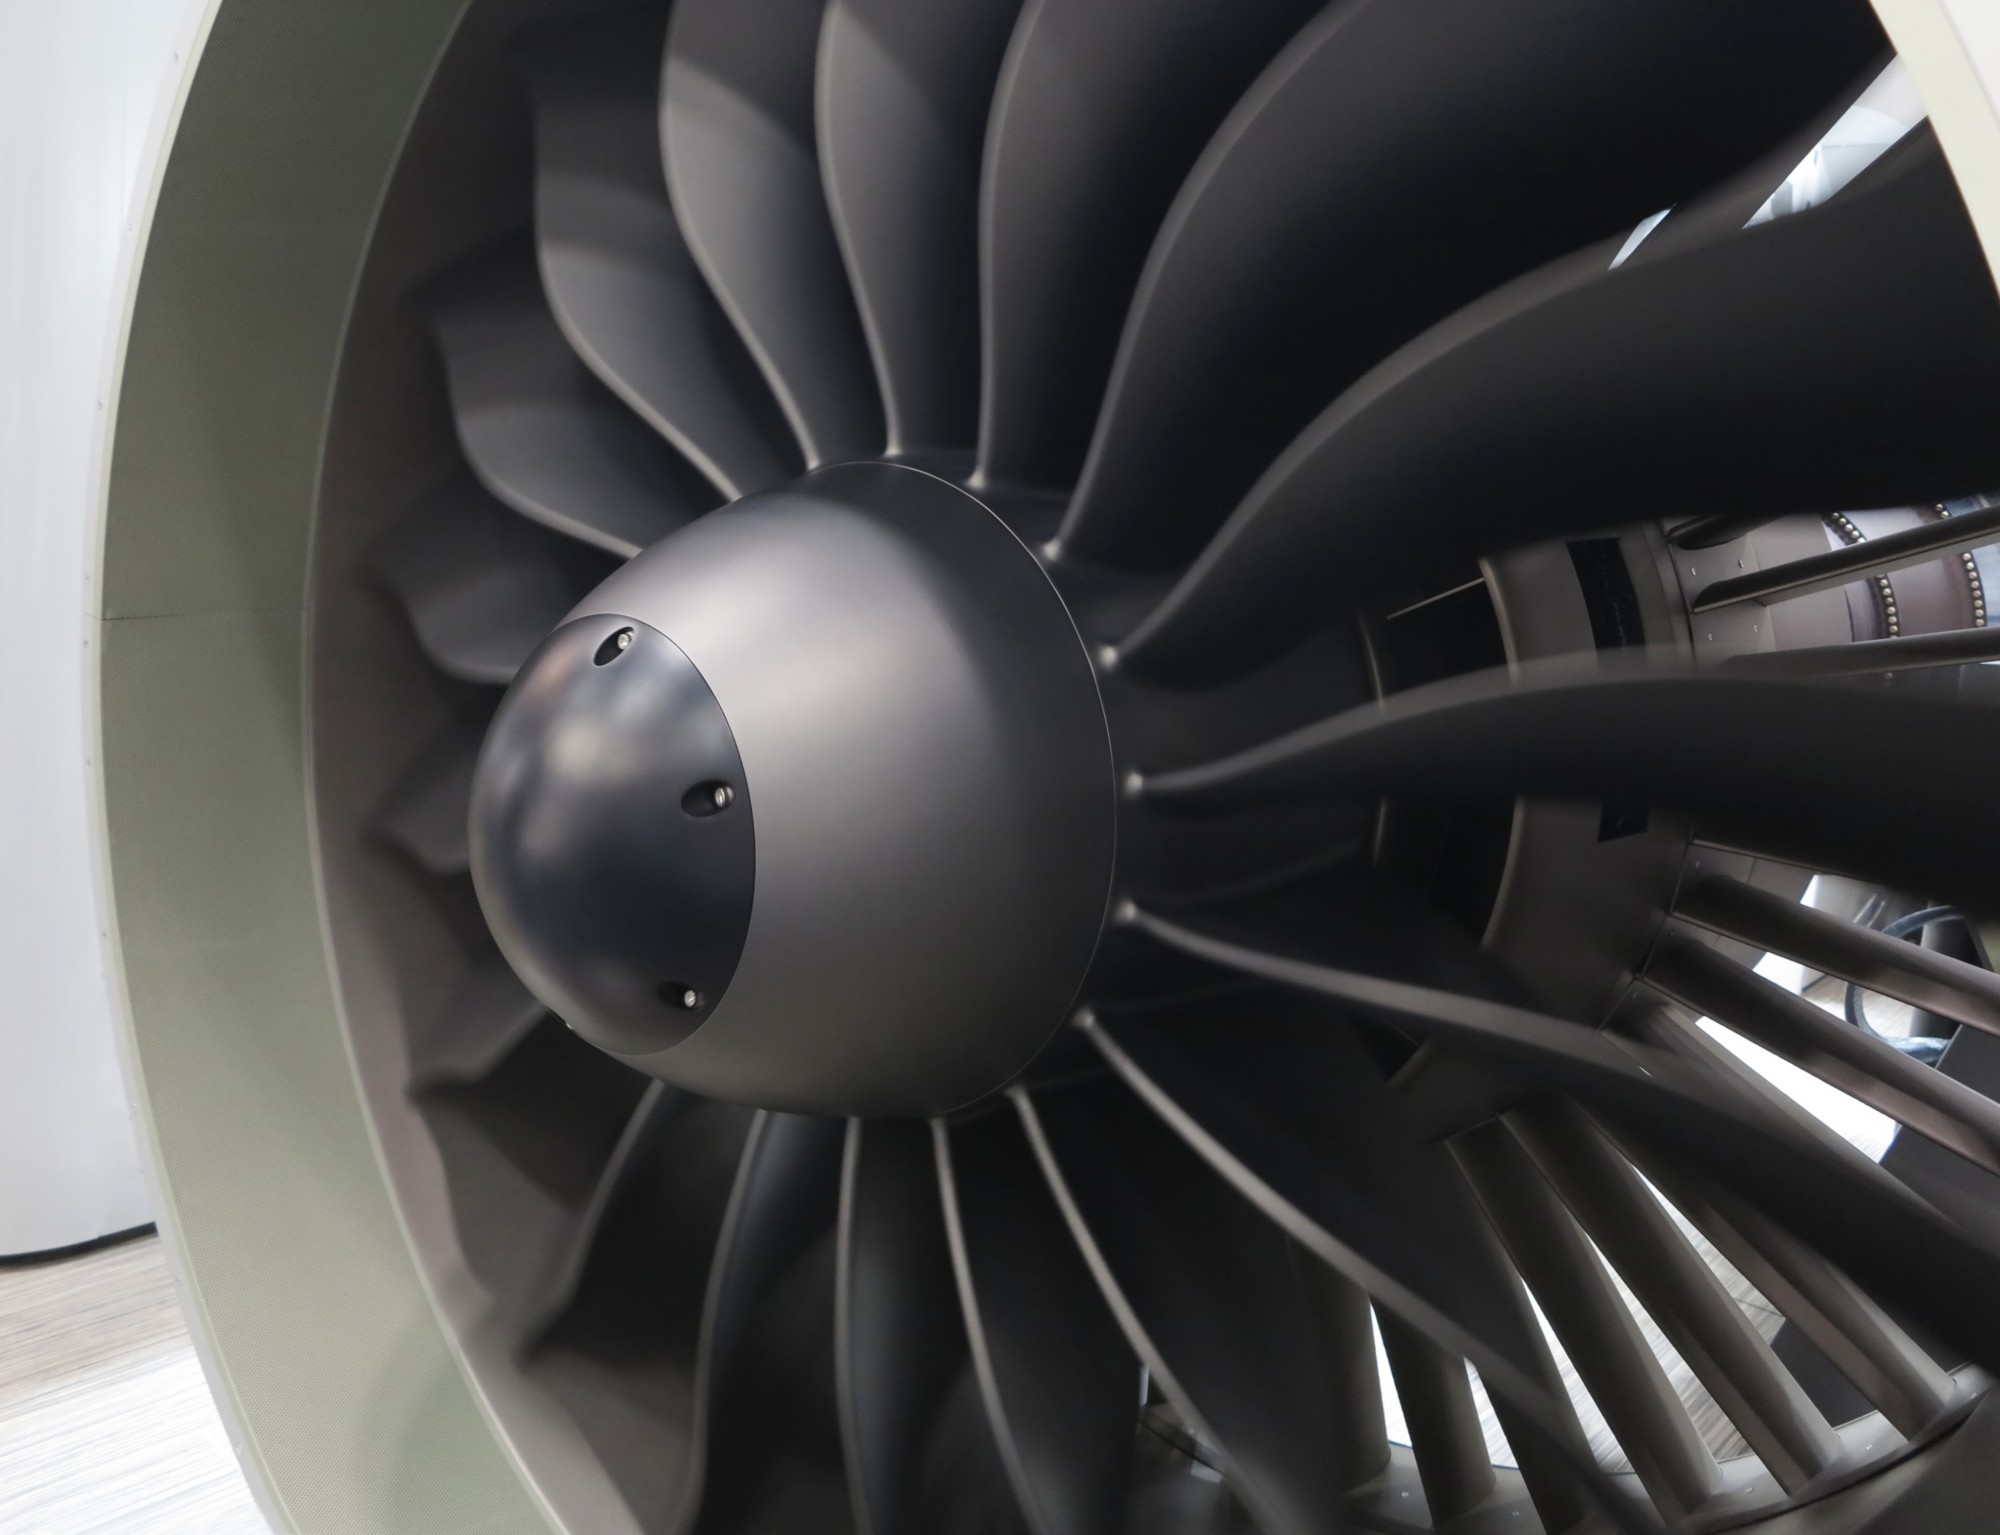 EasyJet and Rolls-Royce Achieve Progress on Hydrogen-Fueled Engines